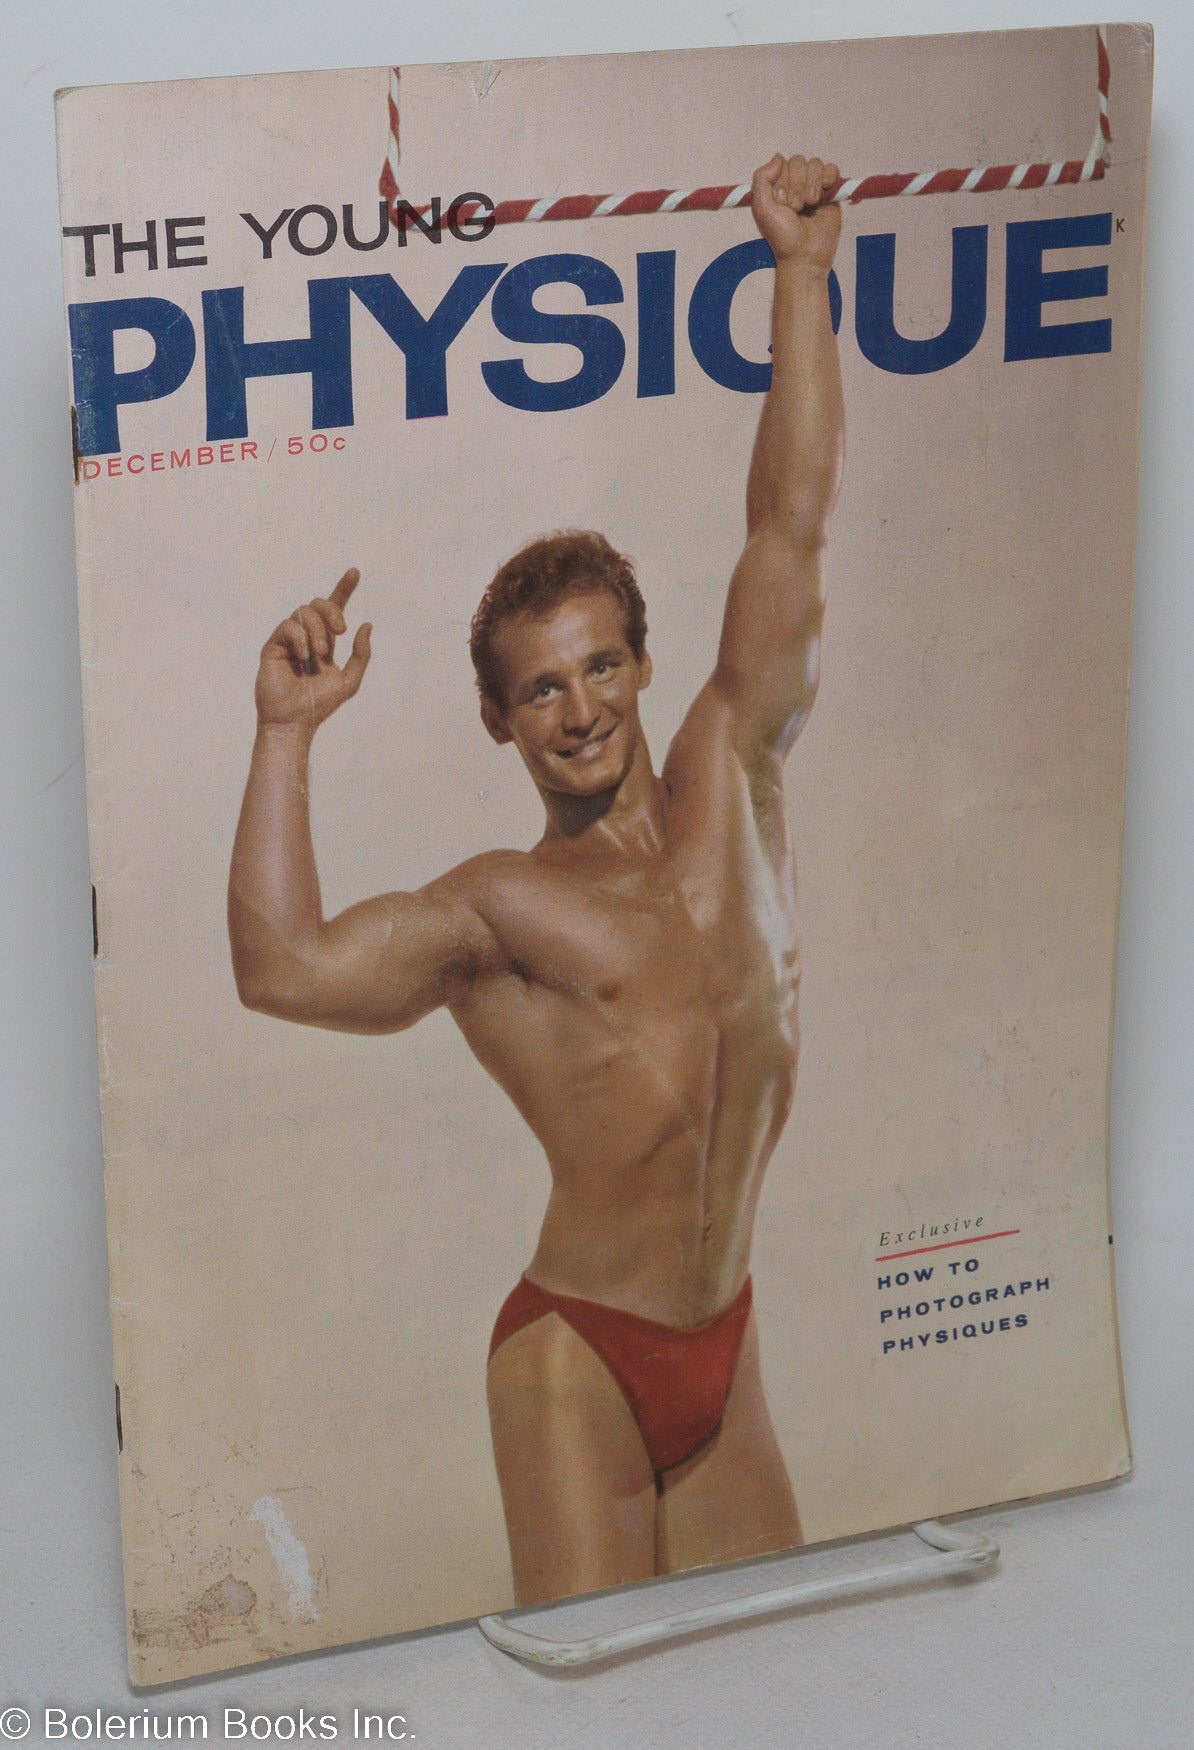 Hawaiian Vintage Teen Nudists - The Young Physique: vol. 2, #5, December 1960: How to photograph physiques  | Larry Scott, Guy Mierczuk, Gene Cook, Paul Como